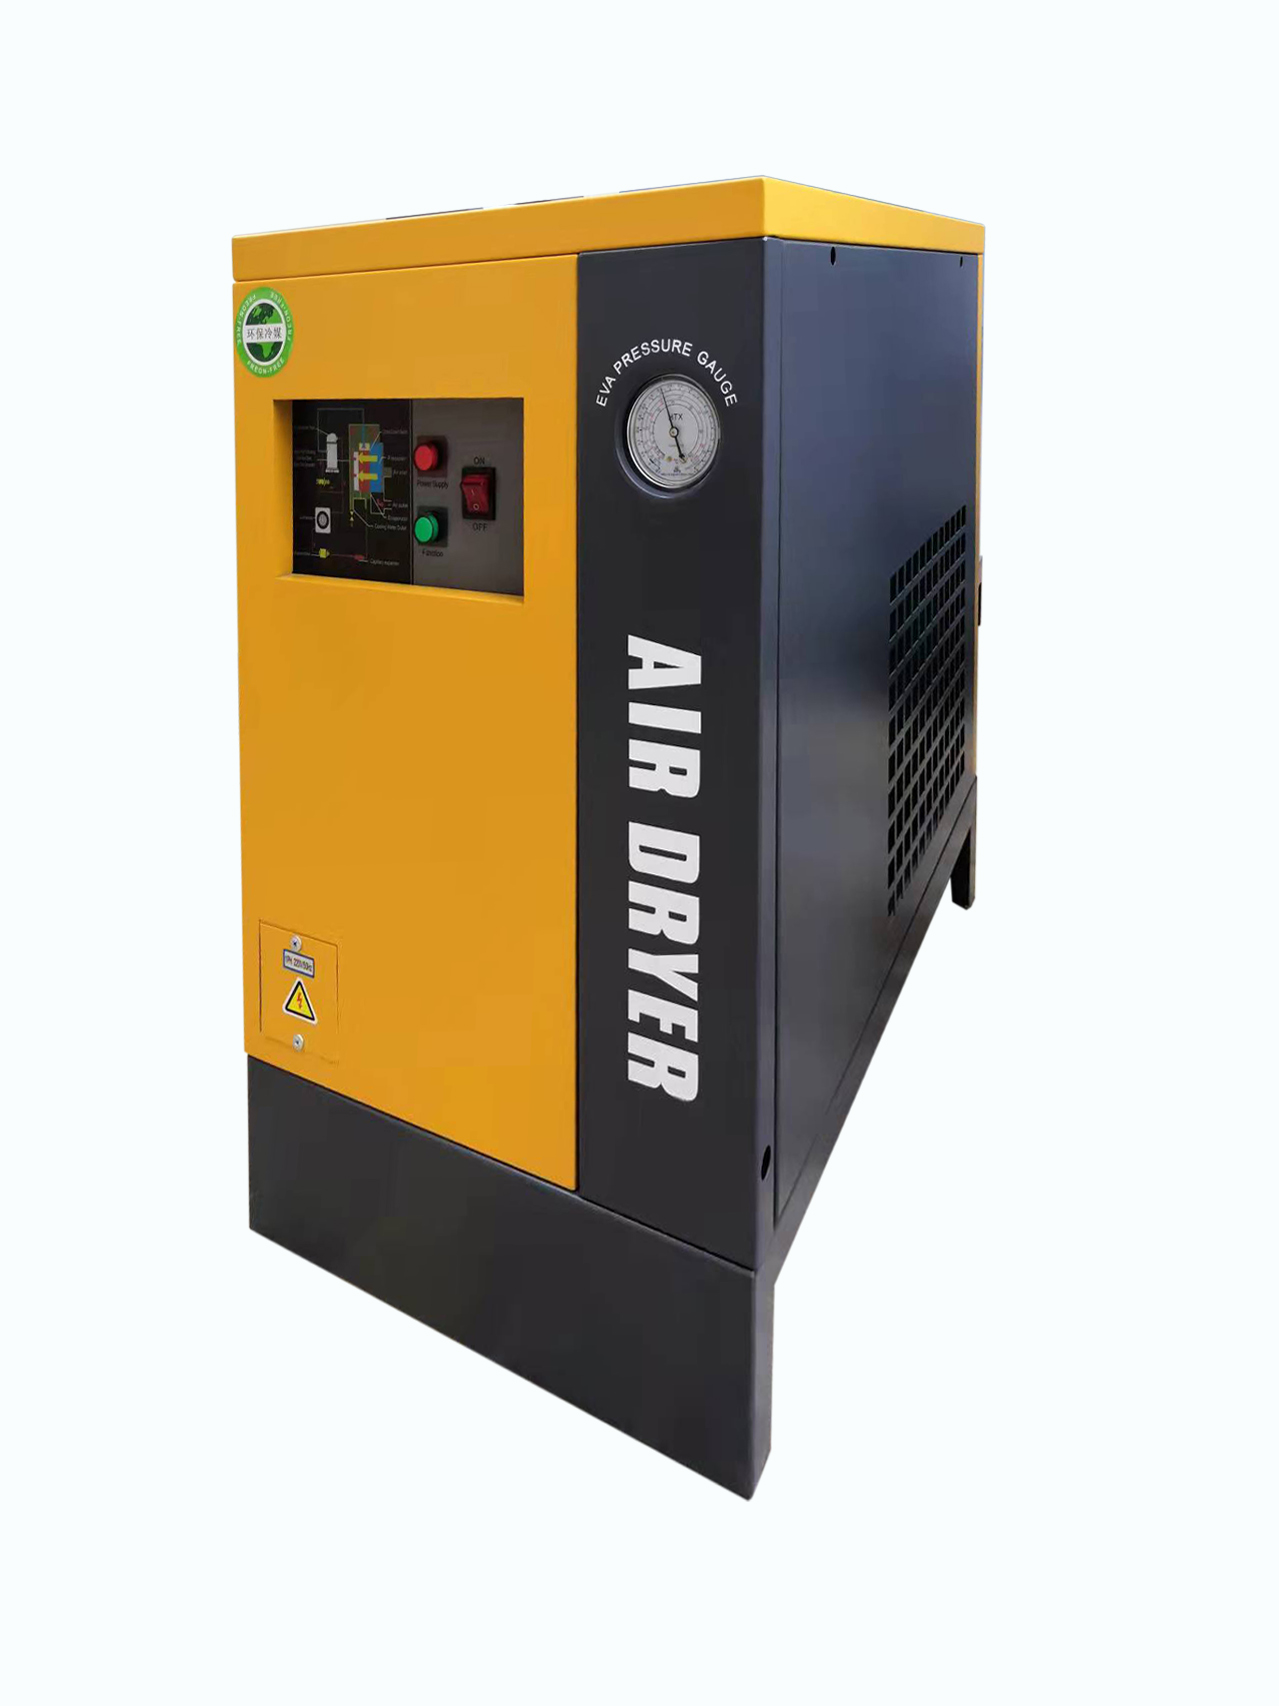 High pressure refrigerated dryer is suitable for air compressor water removal of 800HP